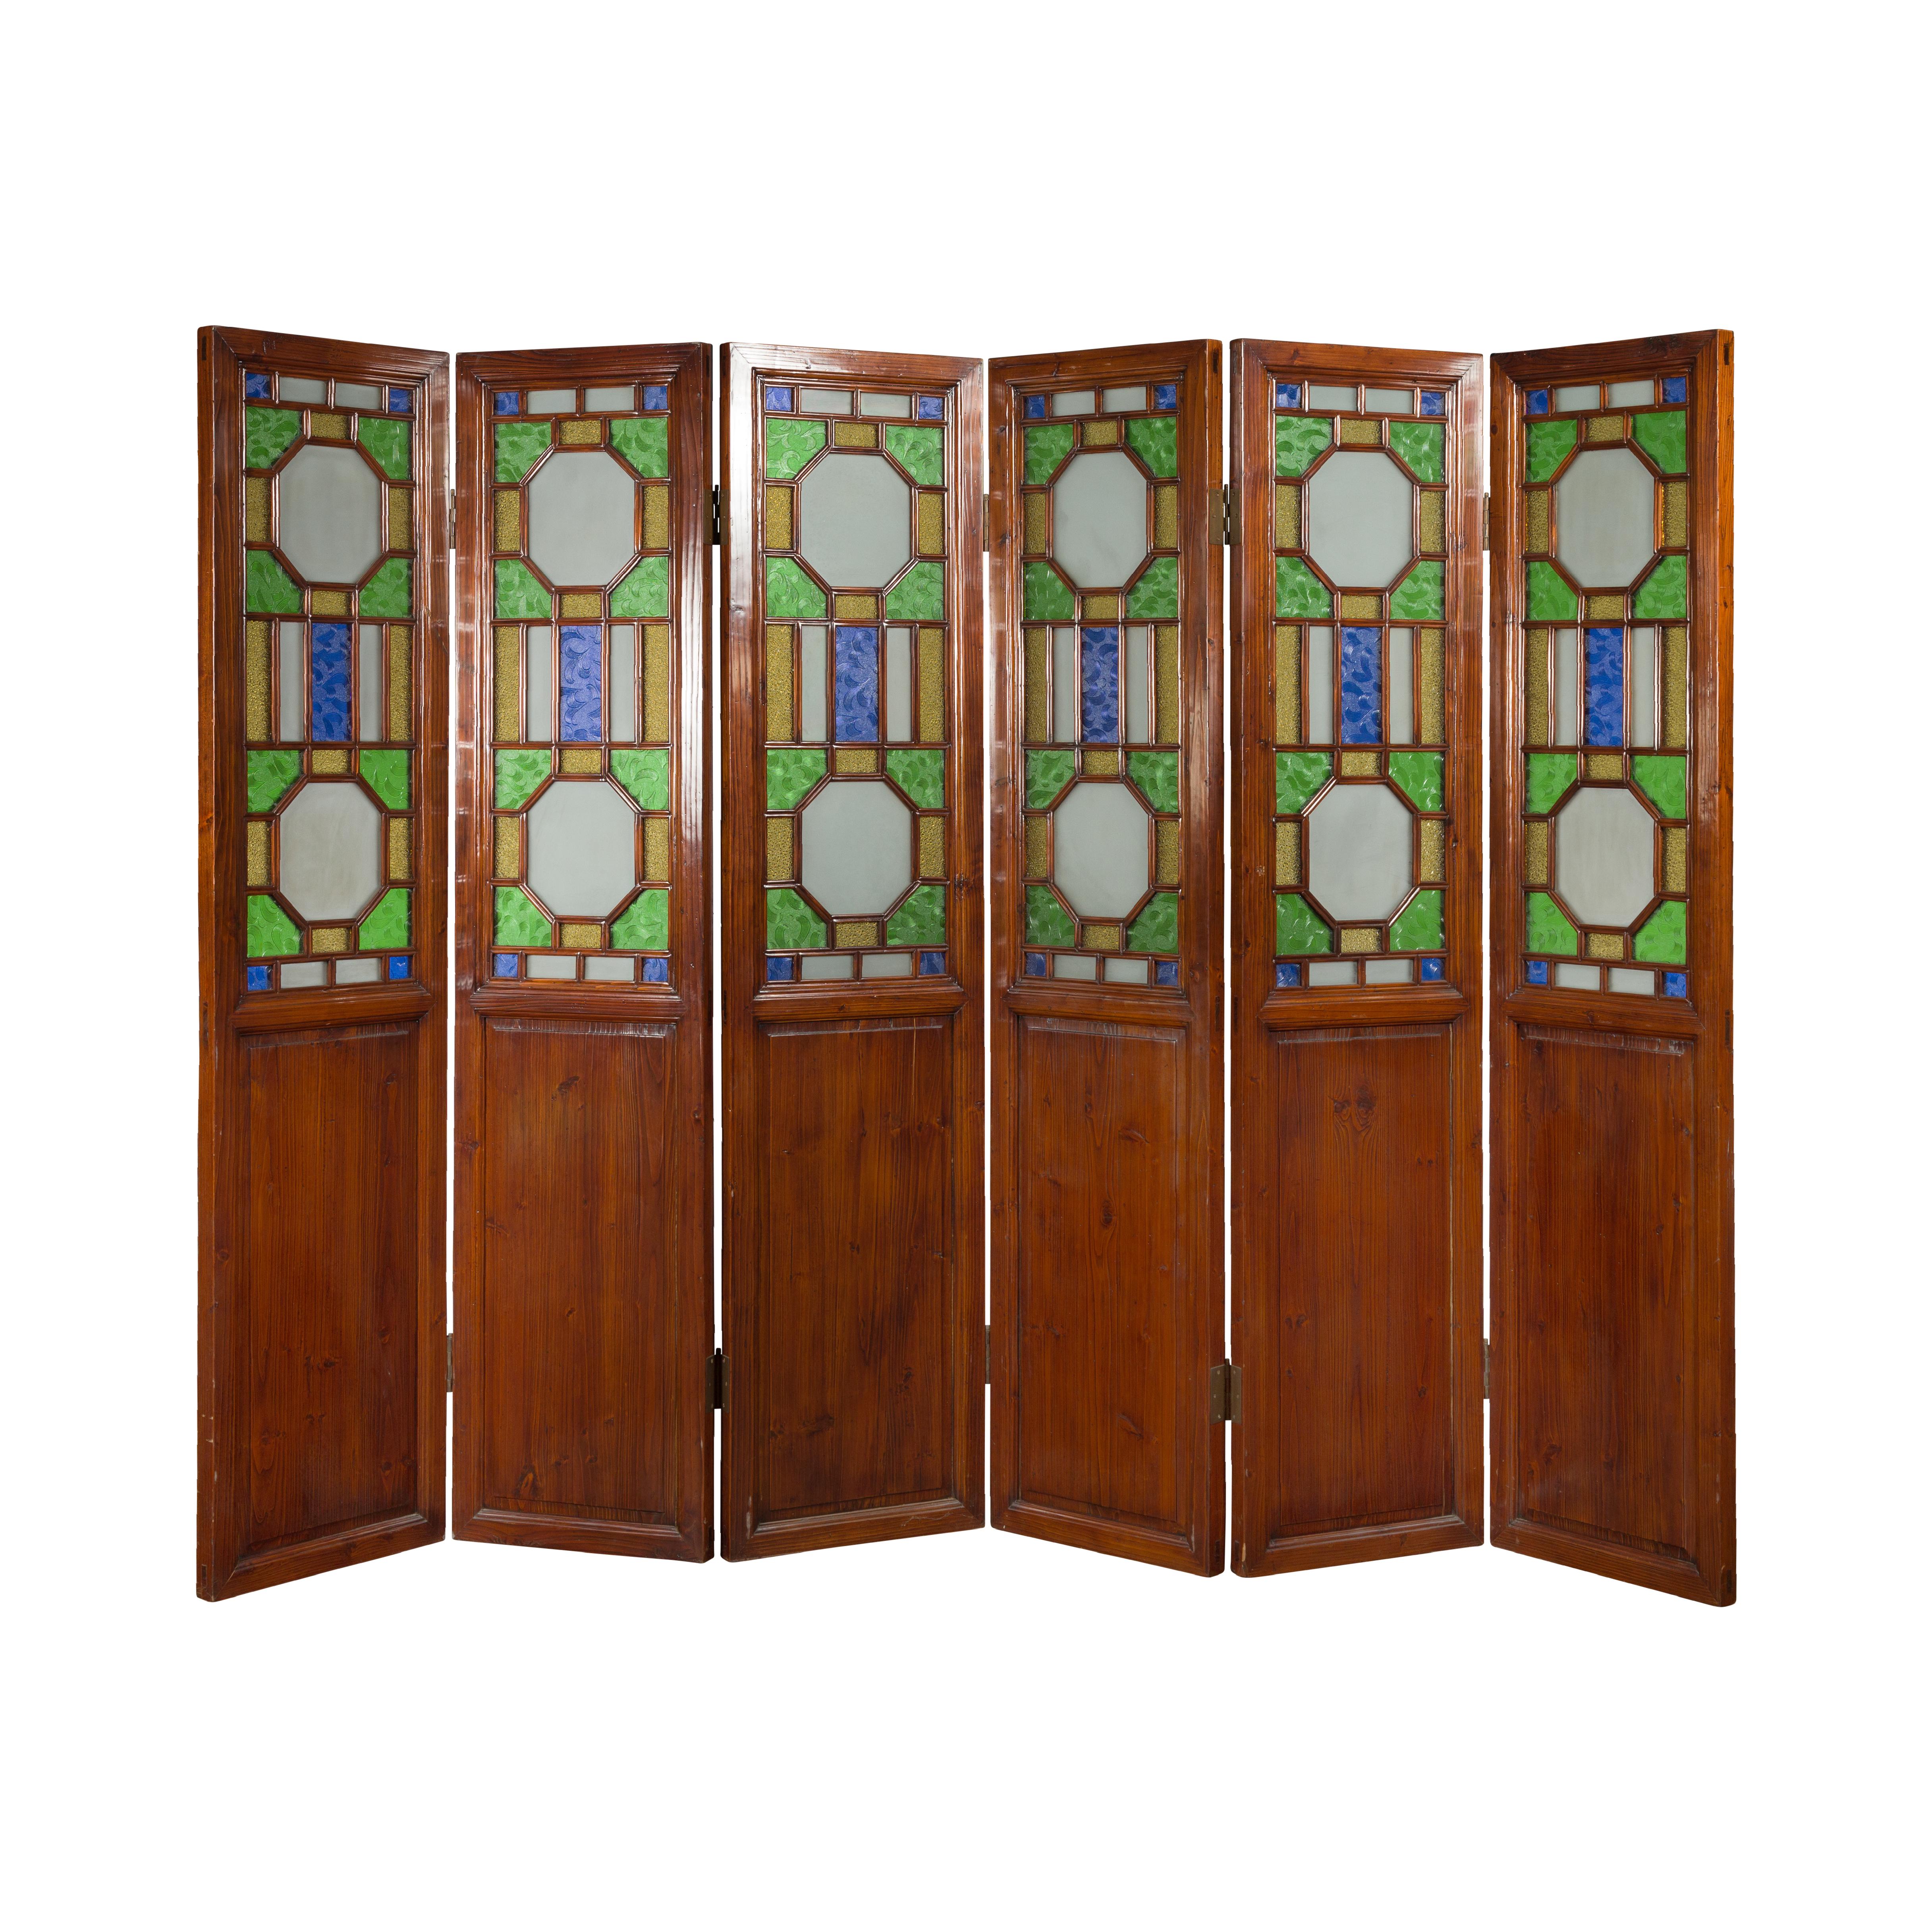 Chinese Antique Six-Panel Folding Screen with Stained Glass Geometric Motifs For Sale 13